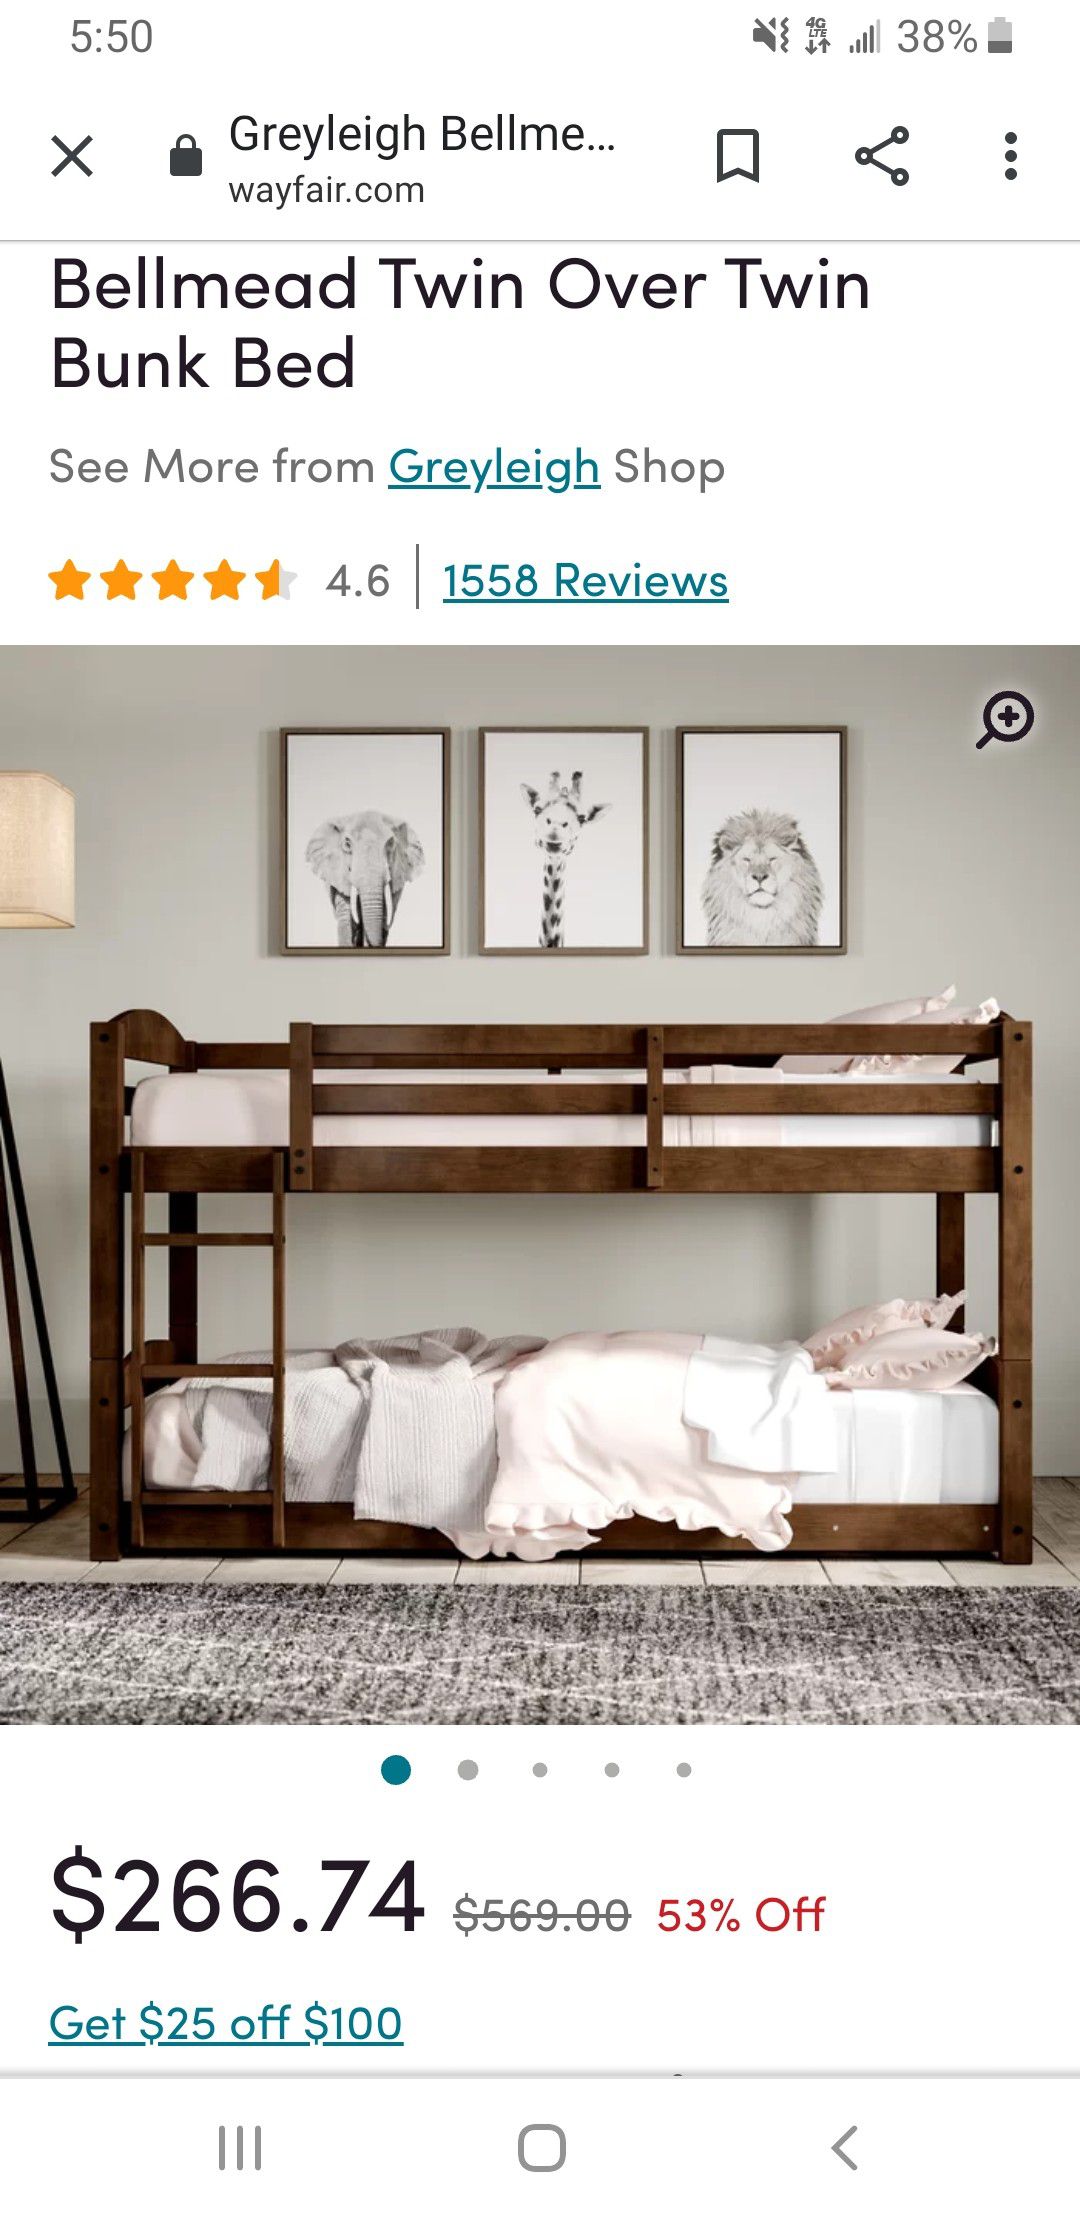 Bellmead twin over twin bunk bed.